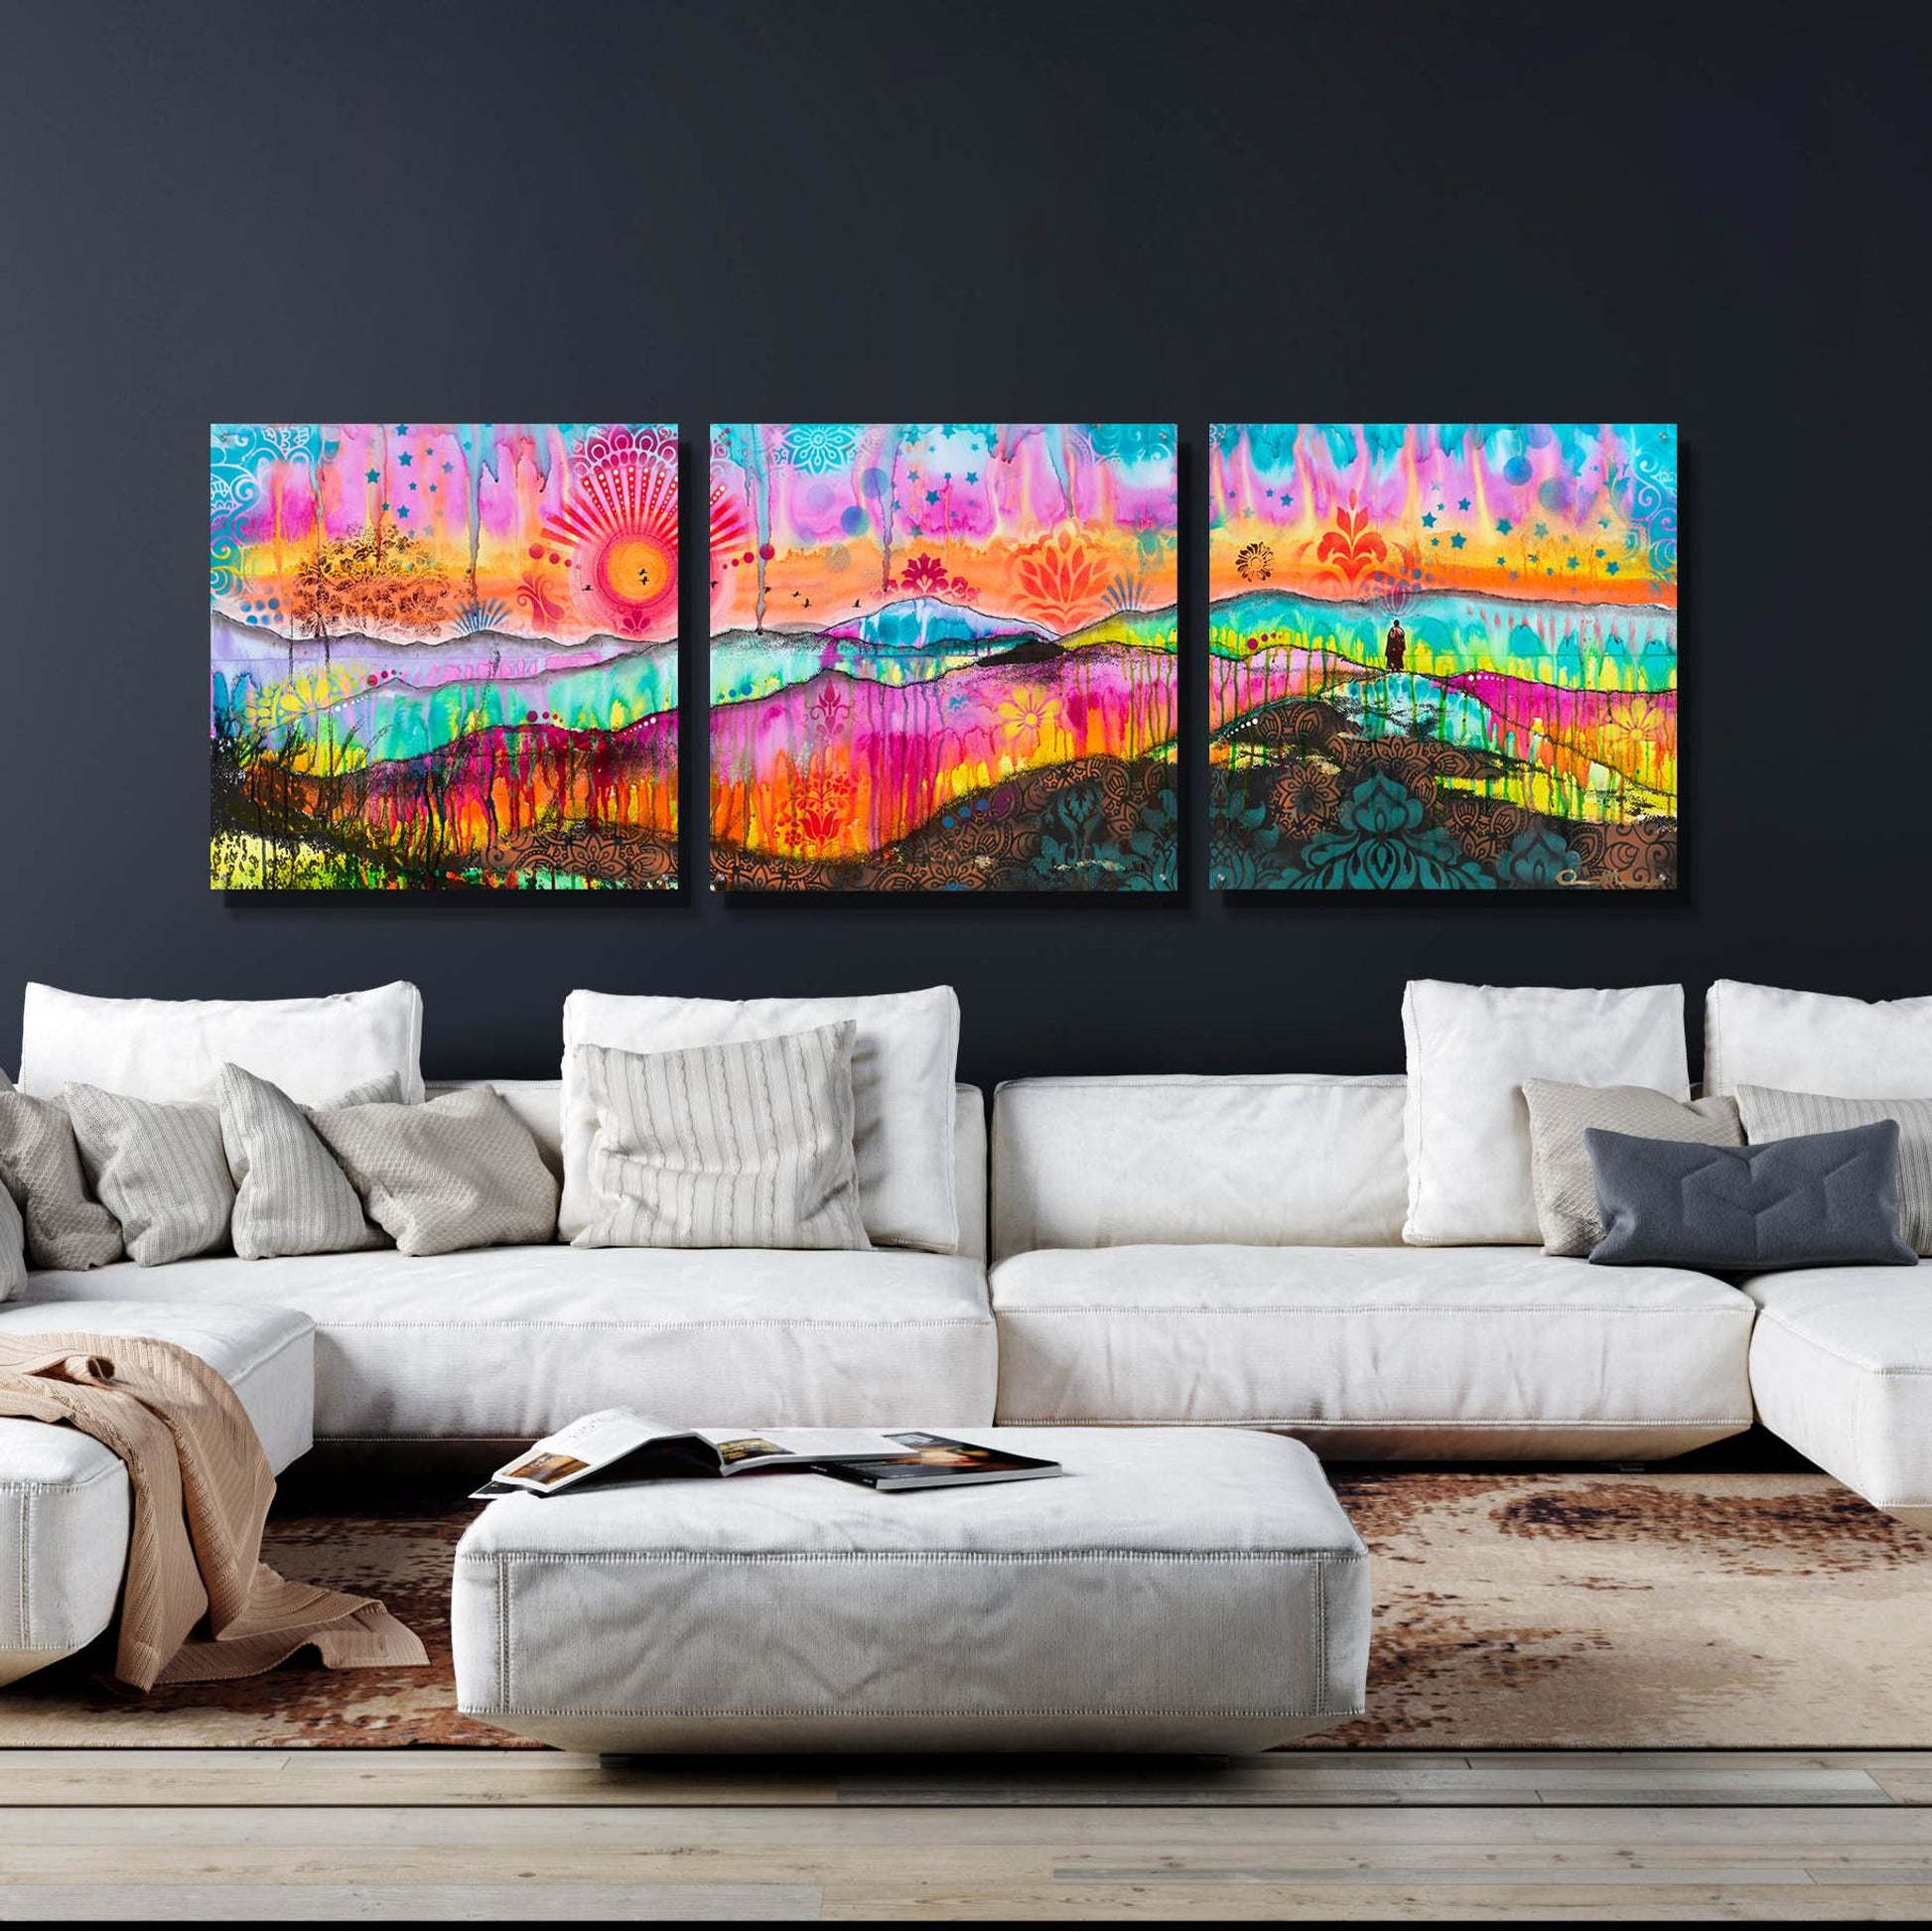 Epic Art 'The Wandering Monk' by Dean Russo, Acrylic Glass Wall Art, 3 Piece Set,108x36